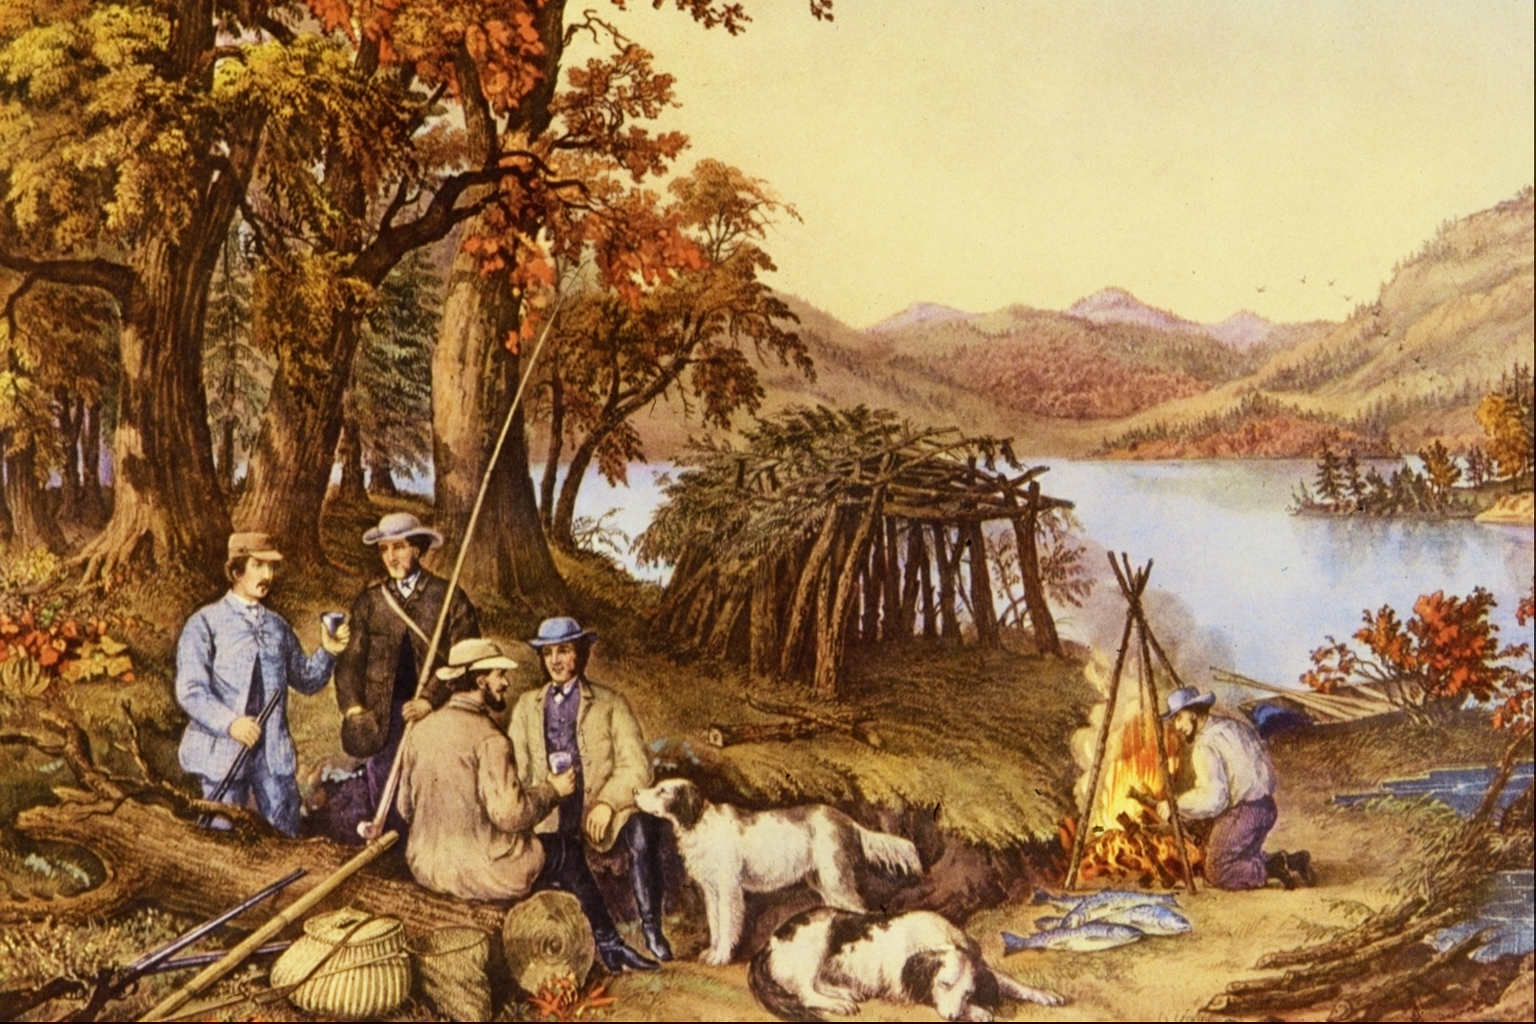 https://upload.wikimedia.org/wikipedia/commons/4/41/Hunting%2C_Fishing_and_Forest_Scenes_-_Currier_and_Ives.png